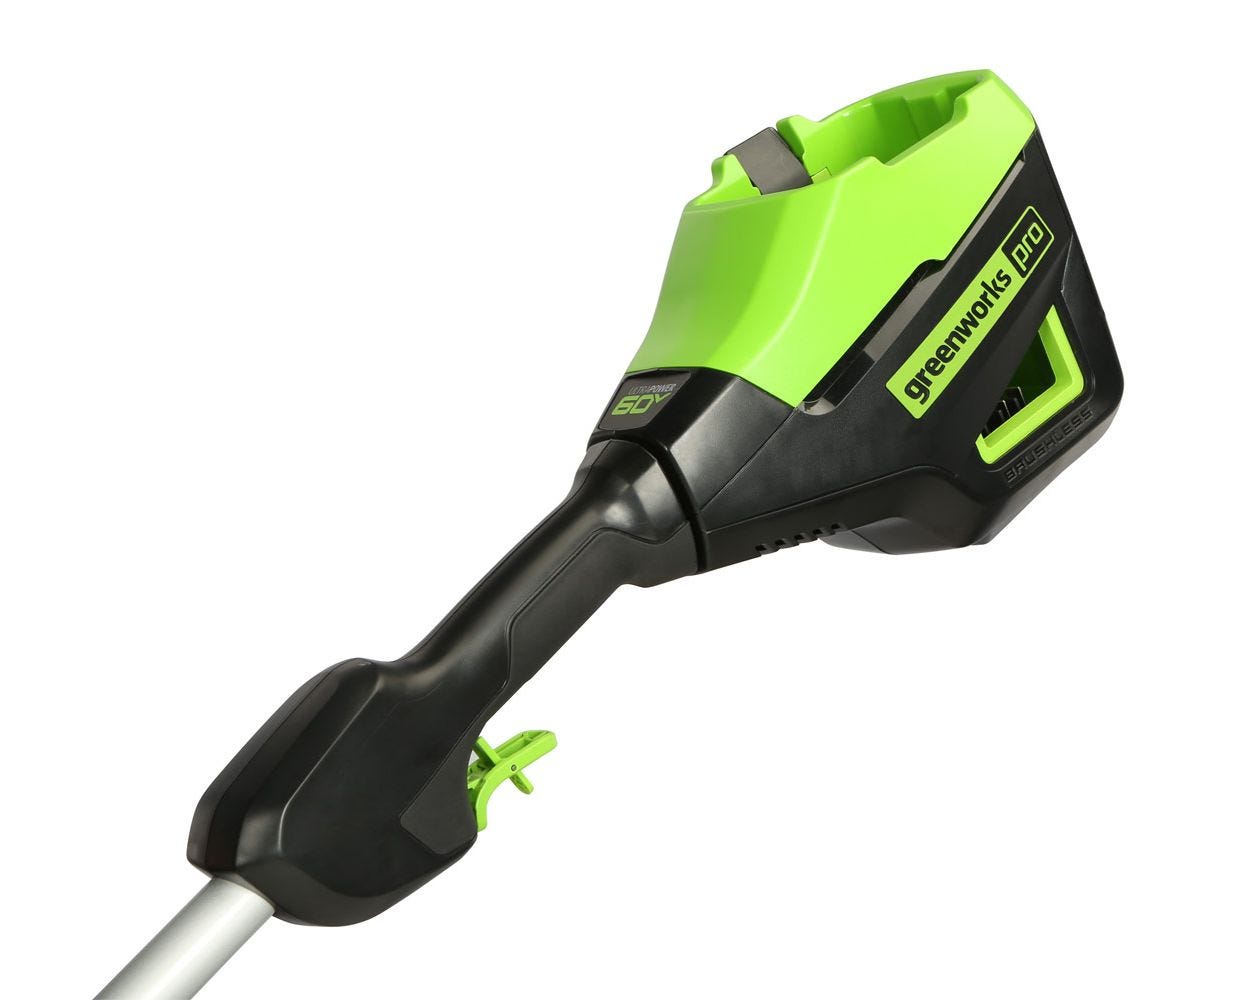 Greenworks PRO 16 in. 60V Battery Cordless Attachment Capable